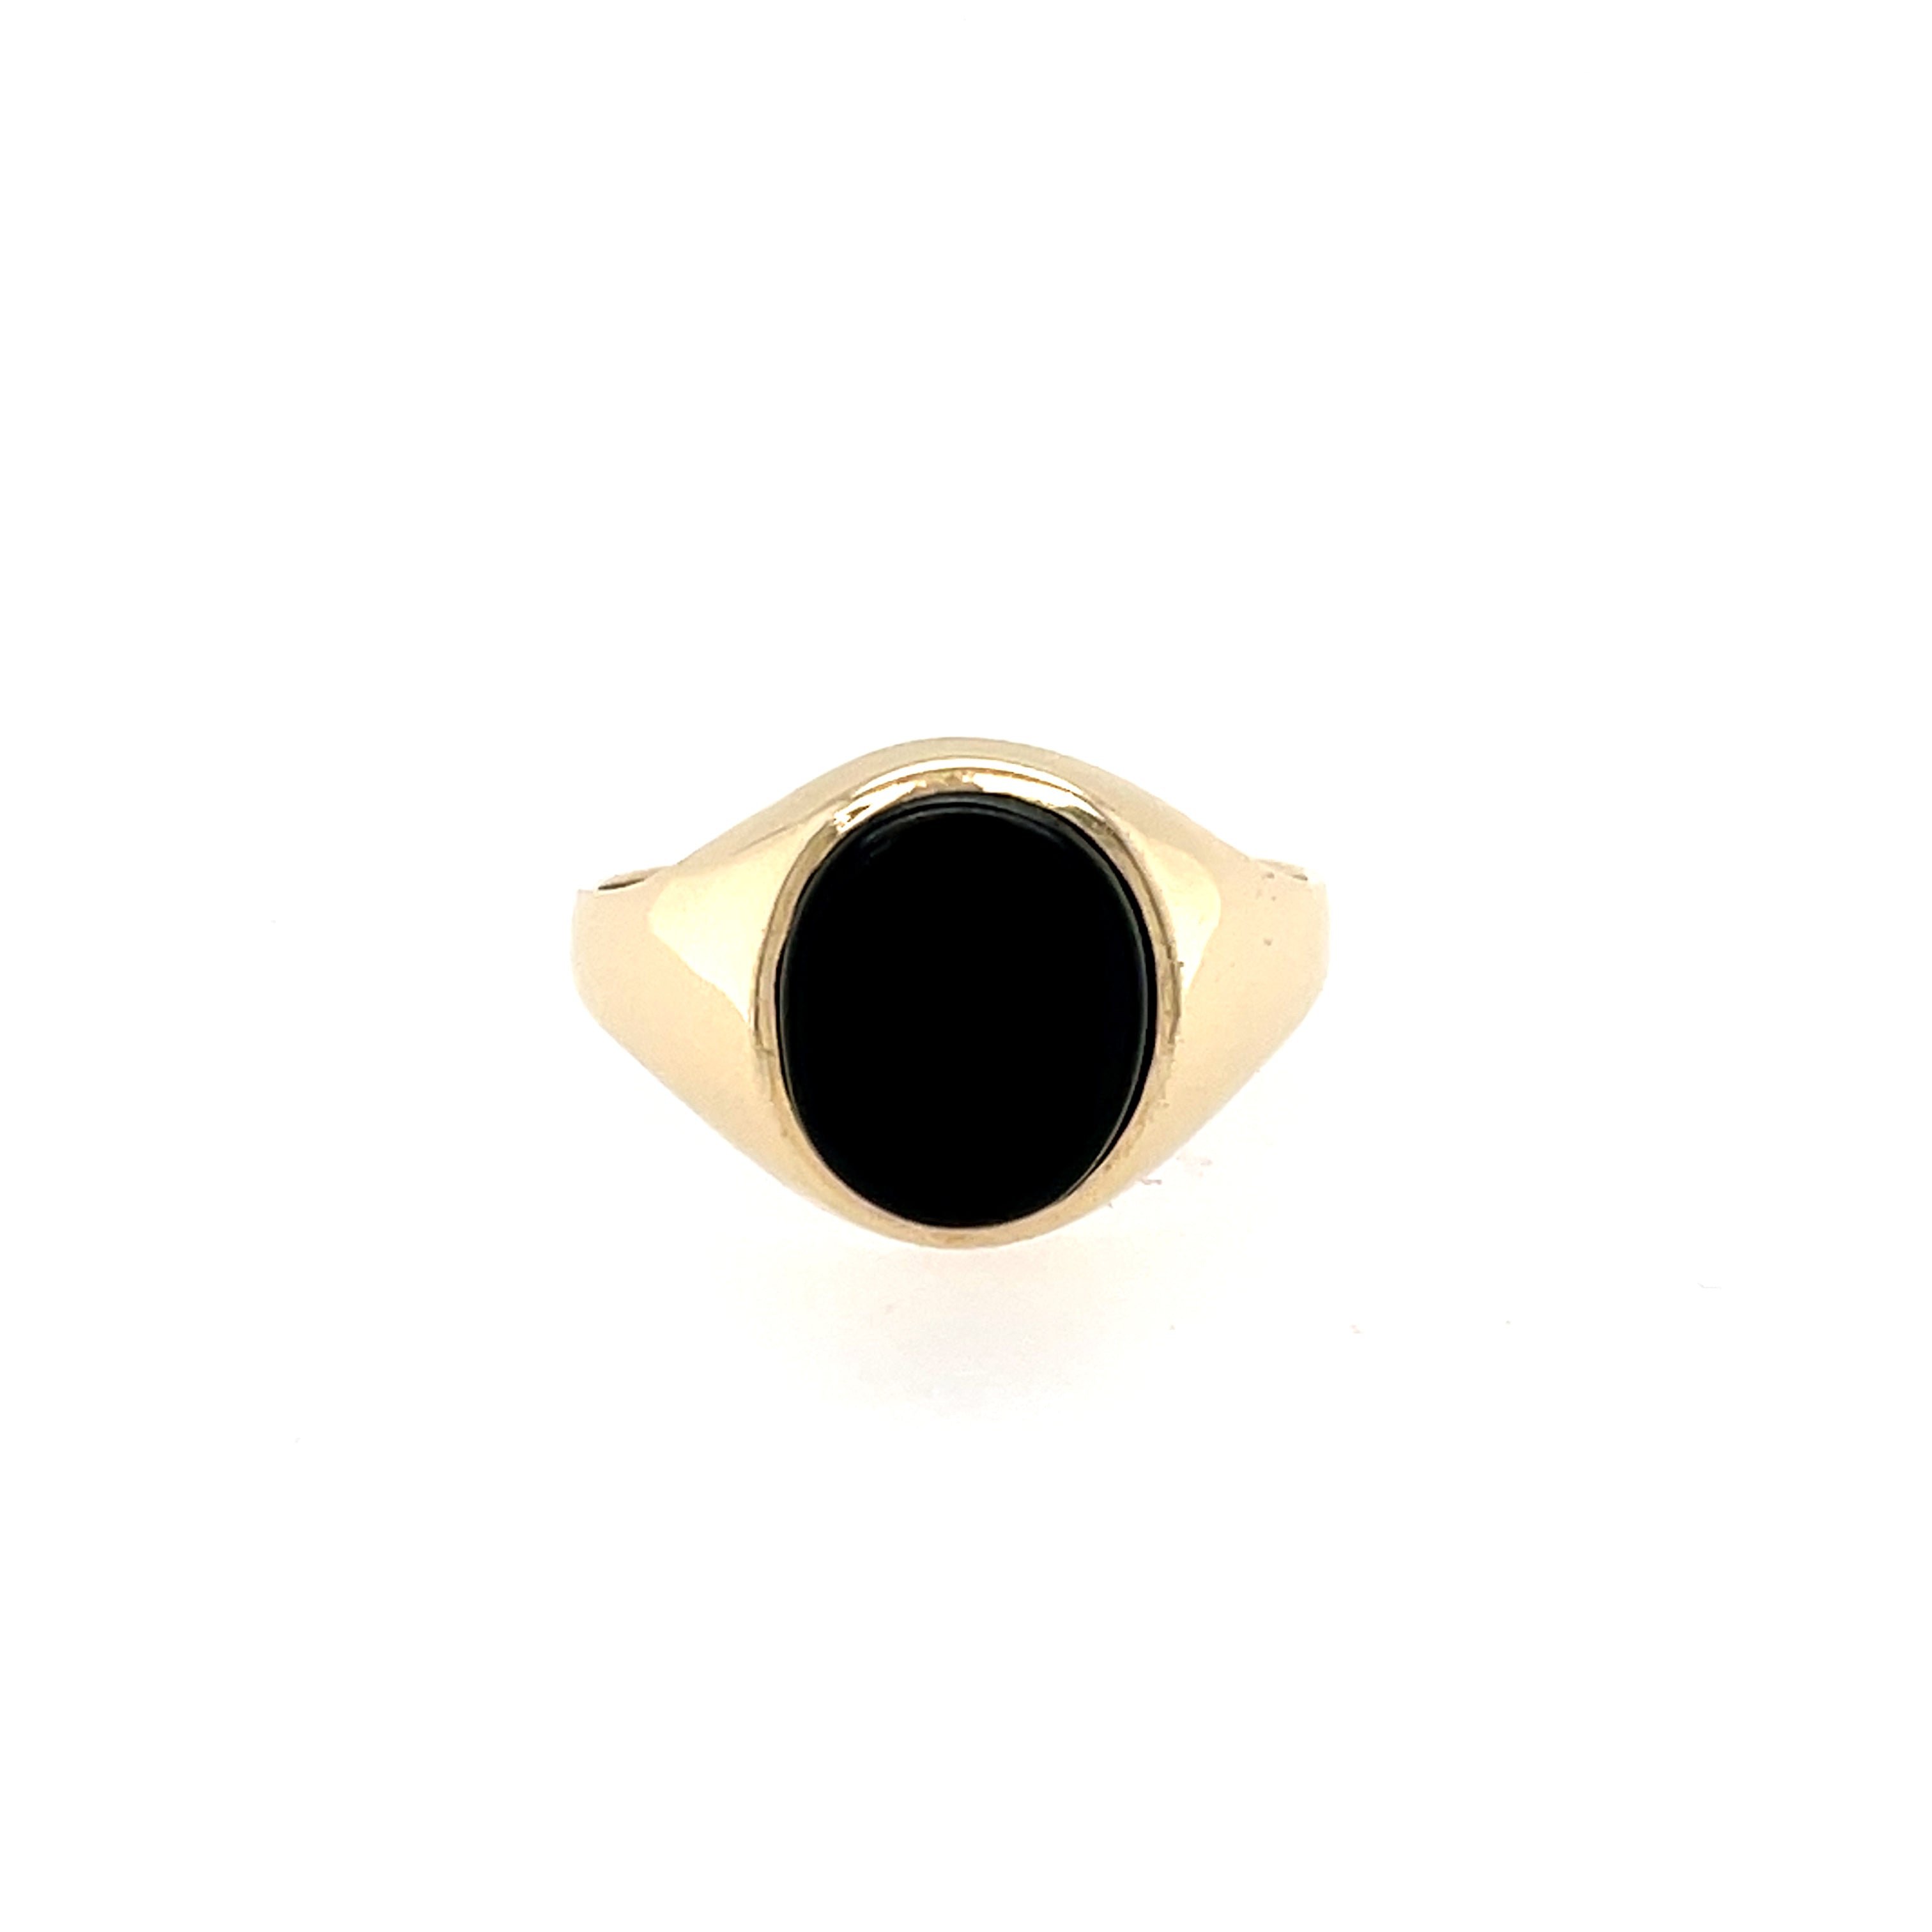 9ct Yellow Gold Vintage Oval Black Onyx Signet Ring - Size U SOLD